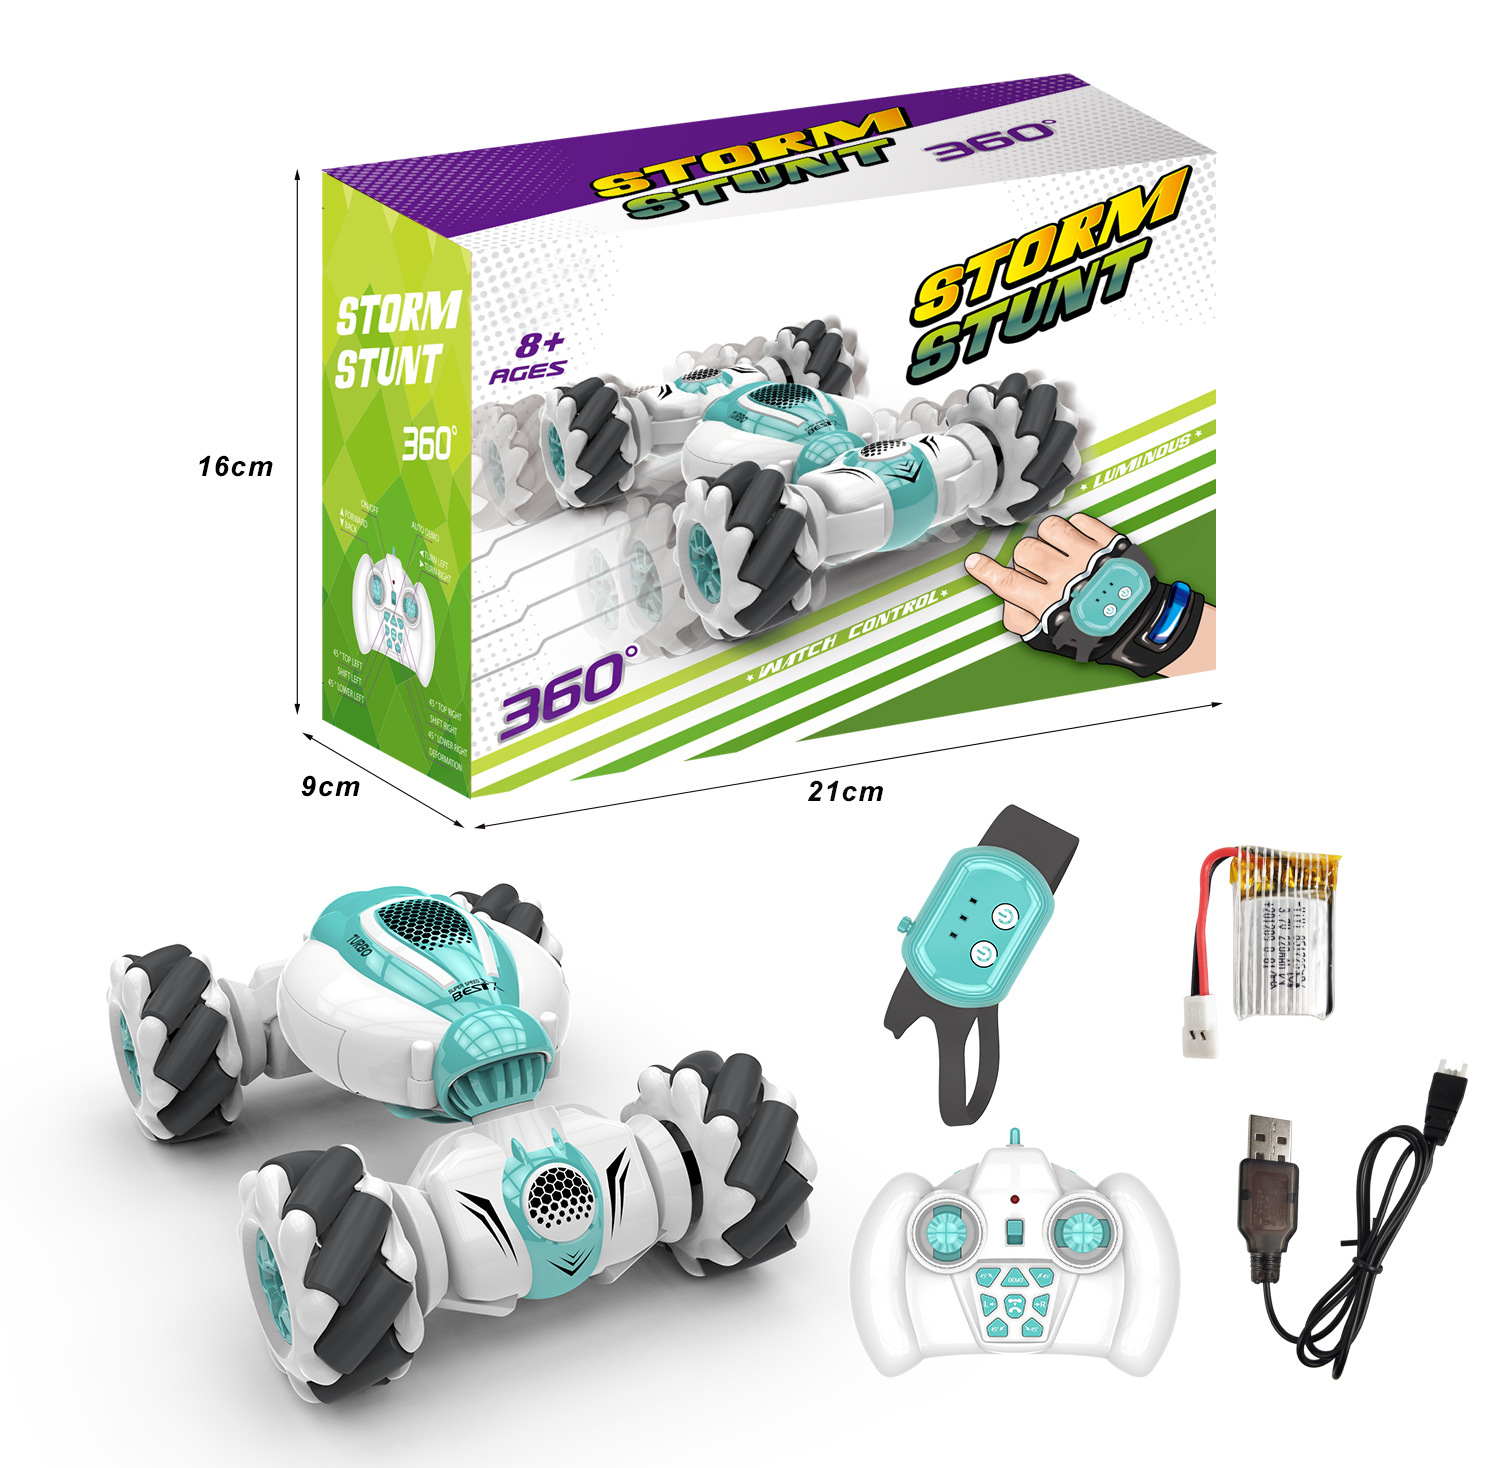 GIFTS2U Redio-Controlled Toy Cars for Kids Ages 5-12 